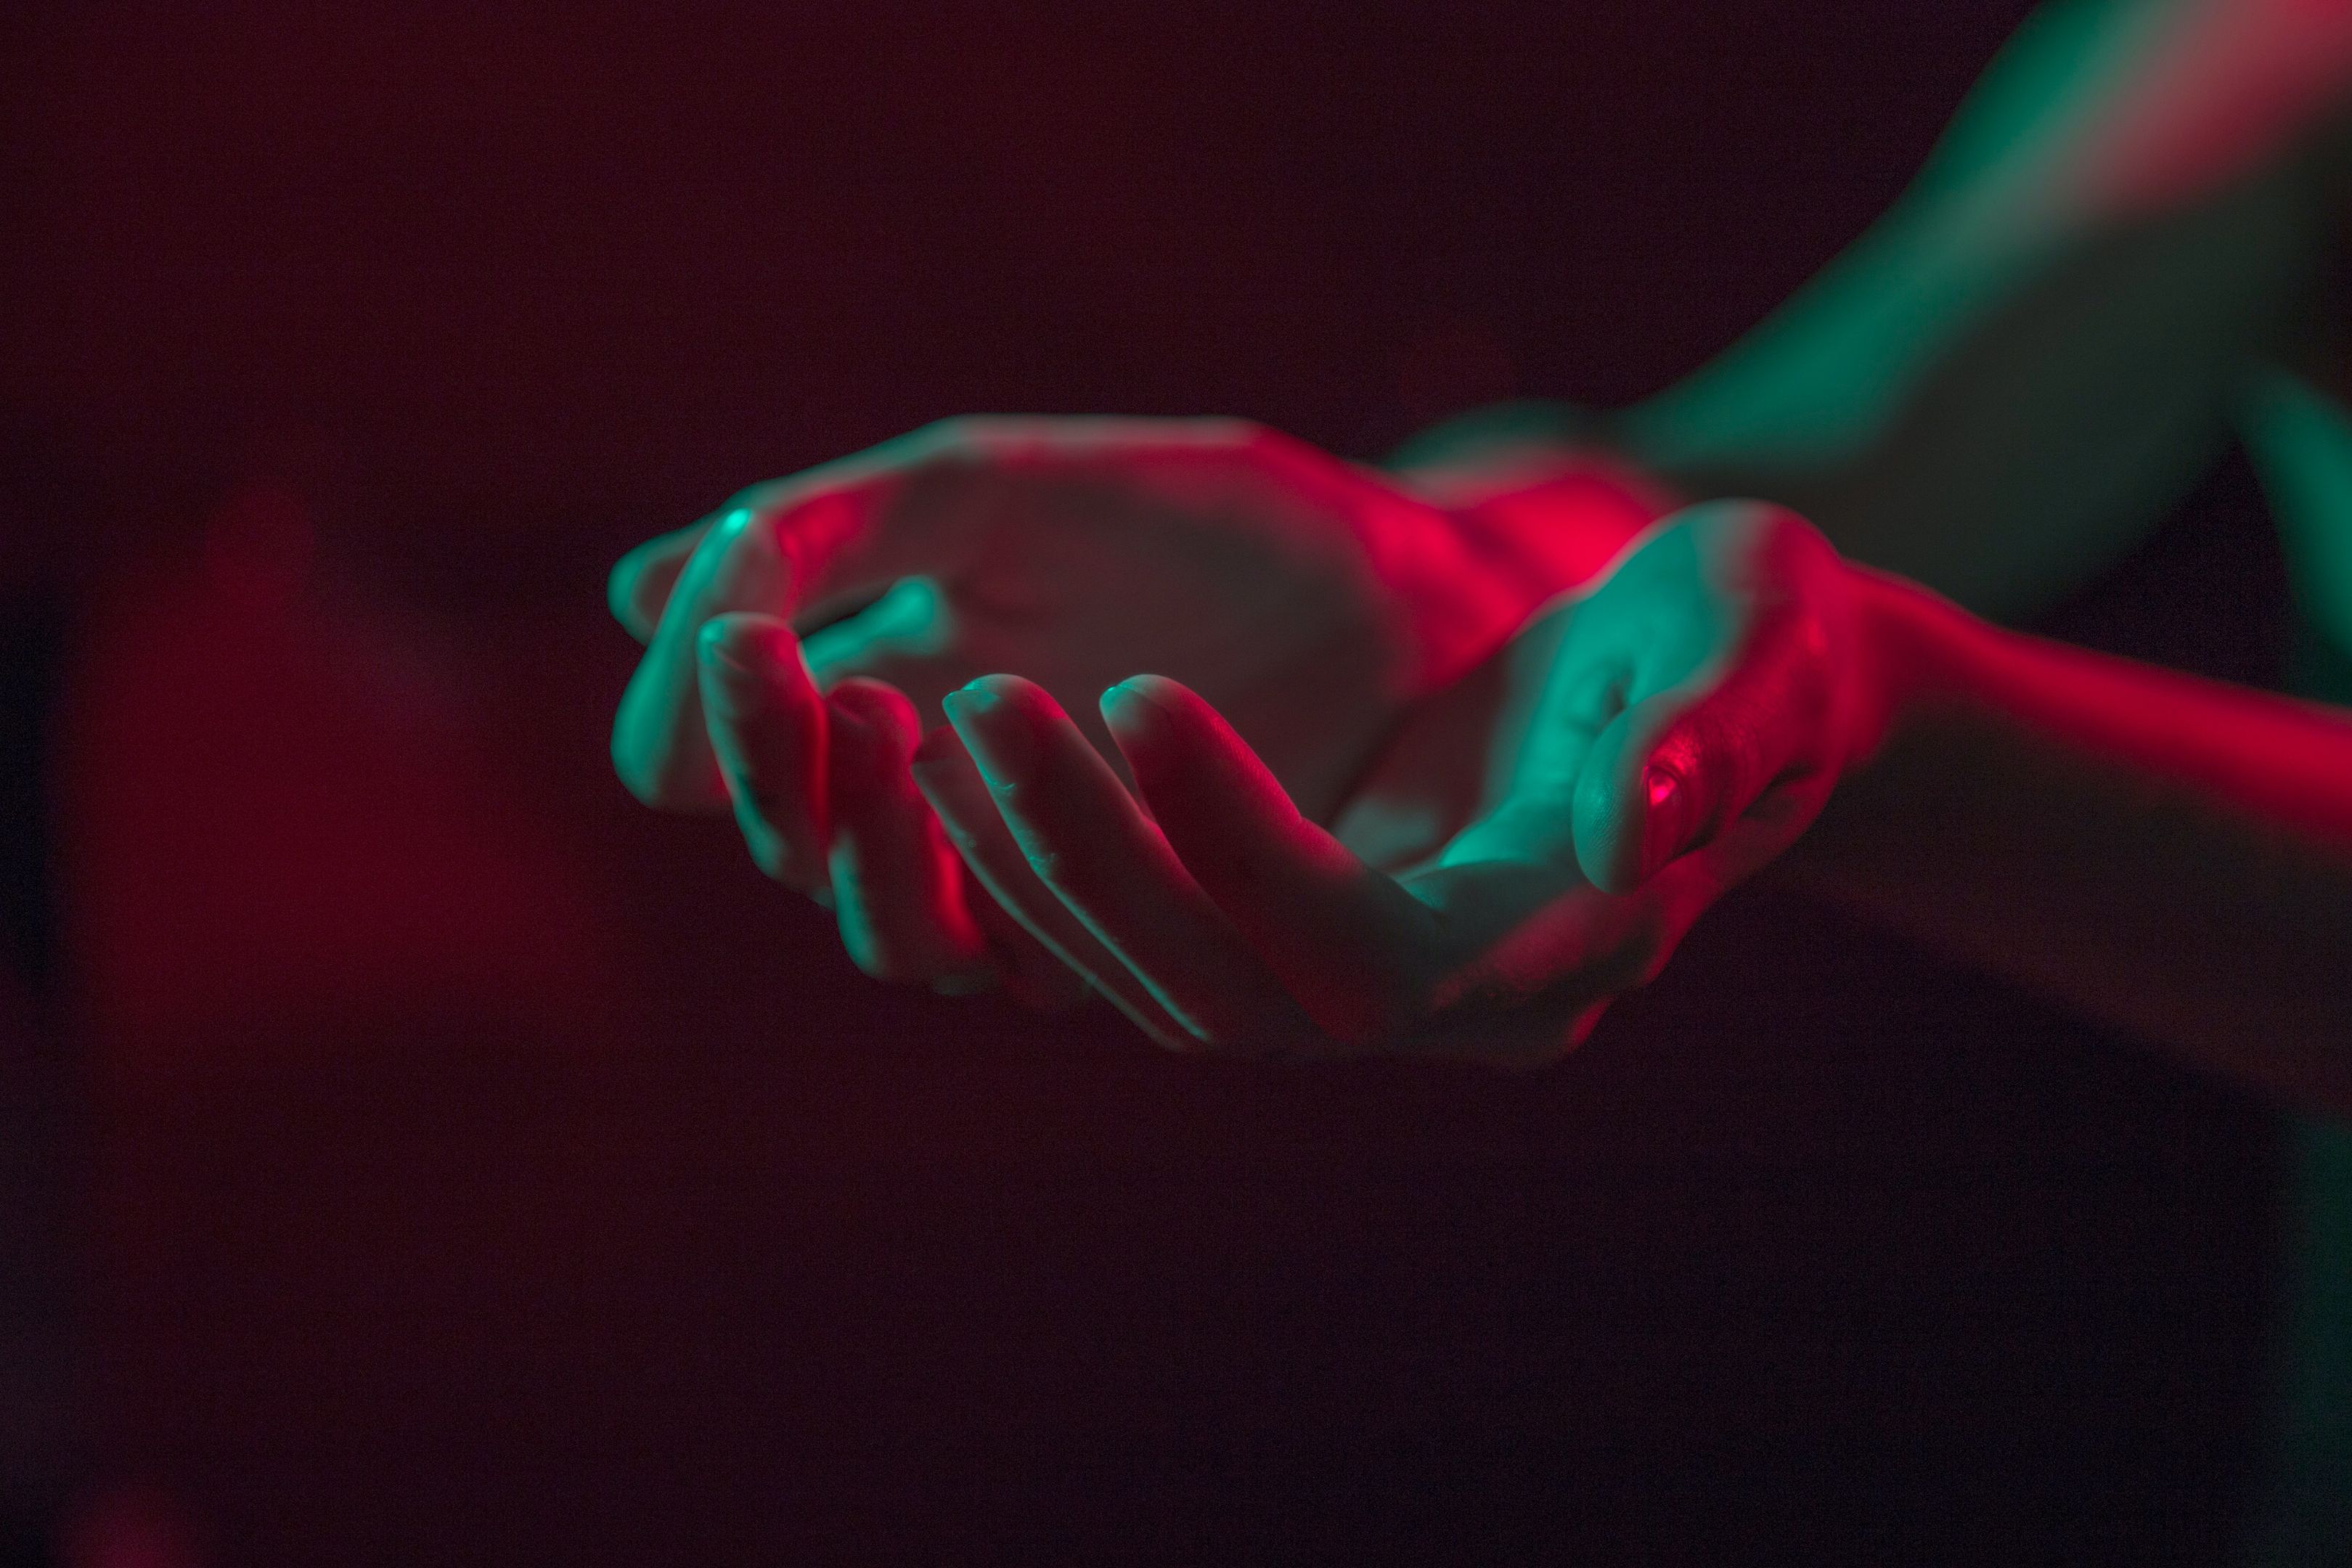 A pair of hands, open, ready to receive something are illuminated by red neon light giving the image a human yet futuristic feel. 